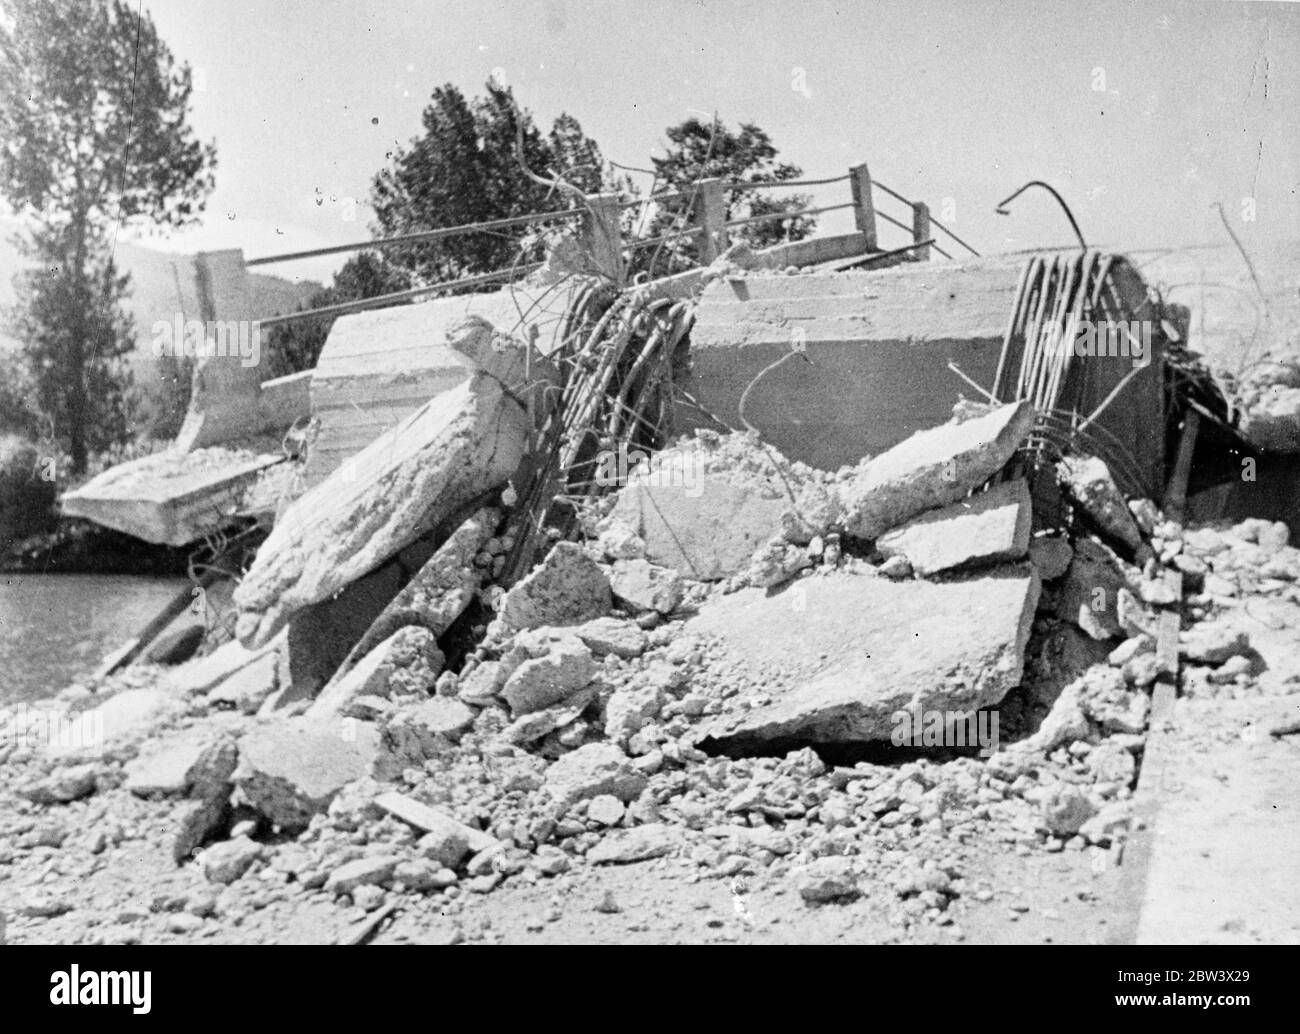 Loyalists Blow Up A Bridge Near Saragossa . A bridge over a river near Zaragoza the city held by the rebels , was dynamited by Government forces , who are carrying on guerrilla warfare in this district . Photo shows : the bridge completely wrecked by the explosion . 26 Aug 1936 Original caption from negative Stock Photo